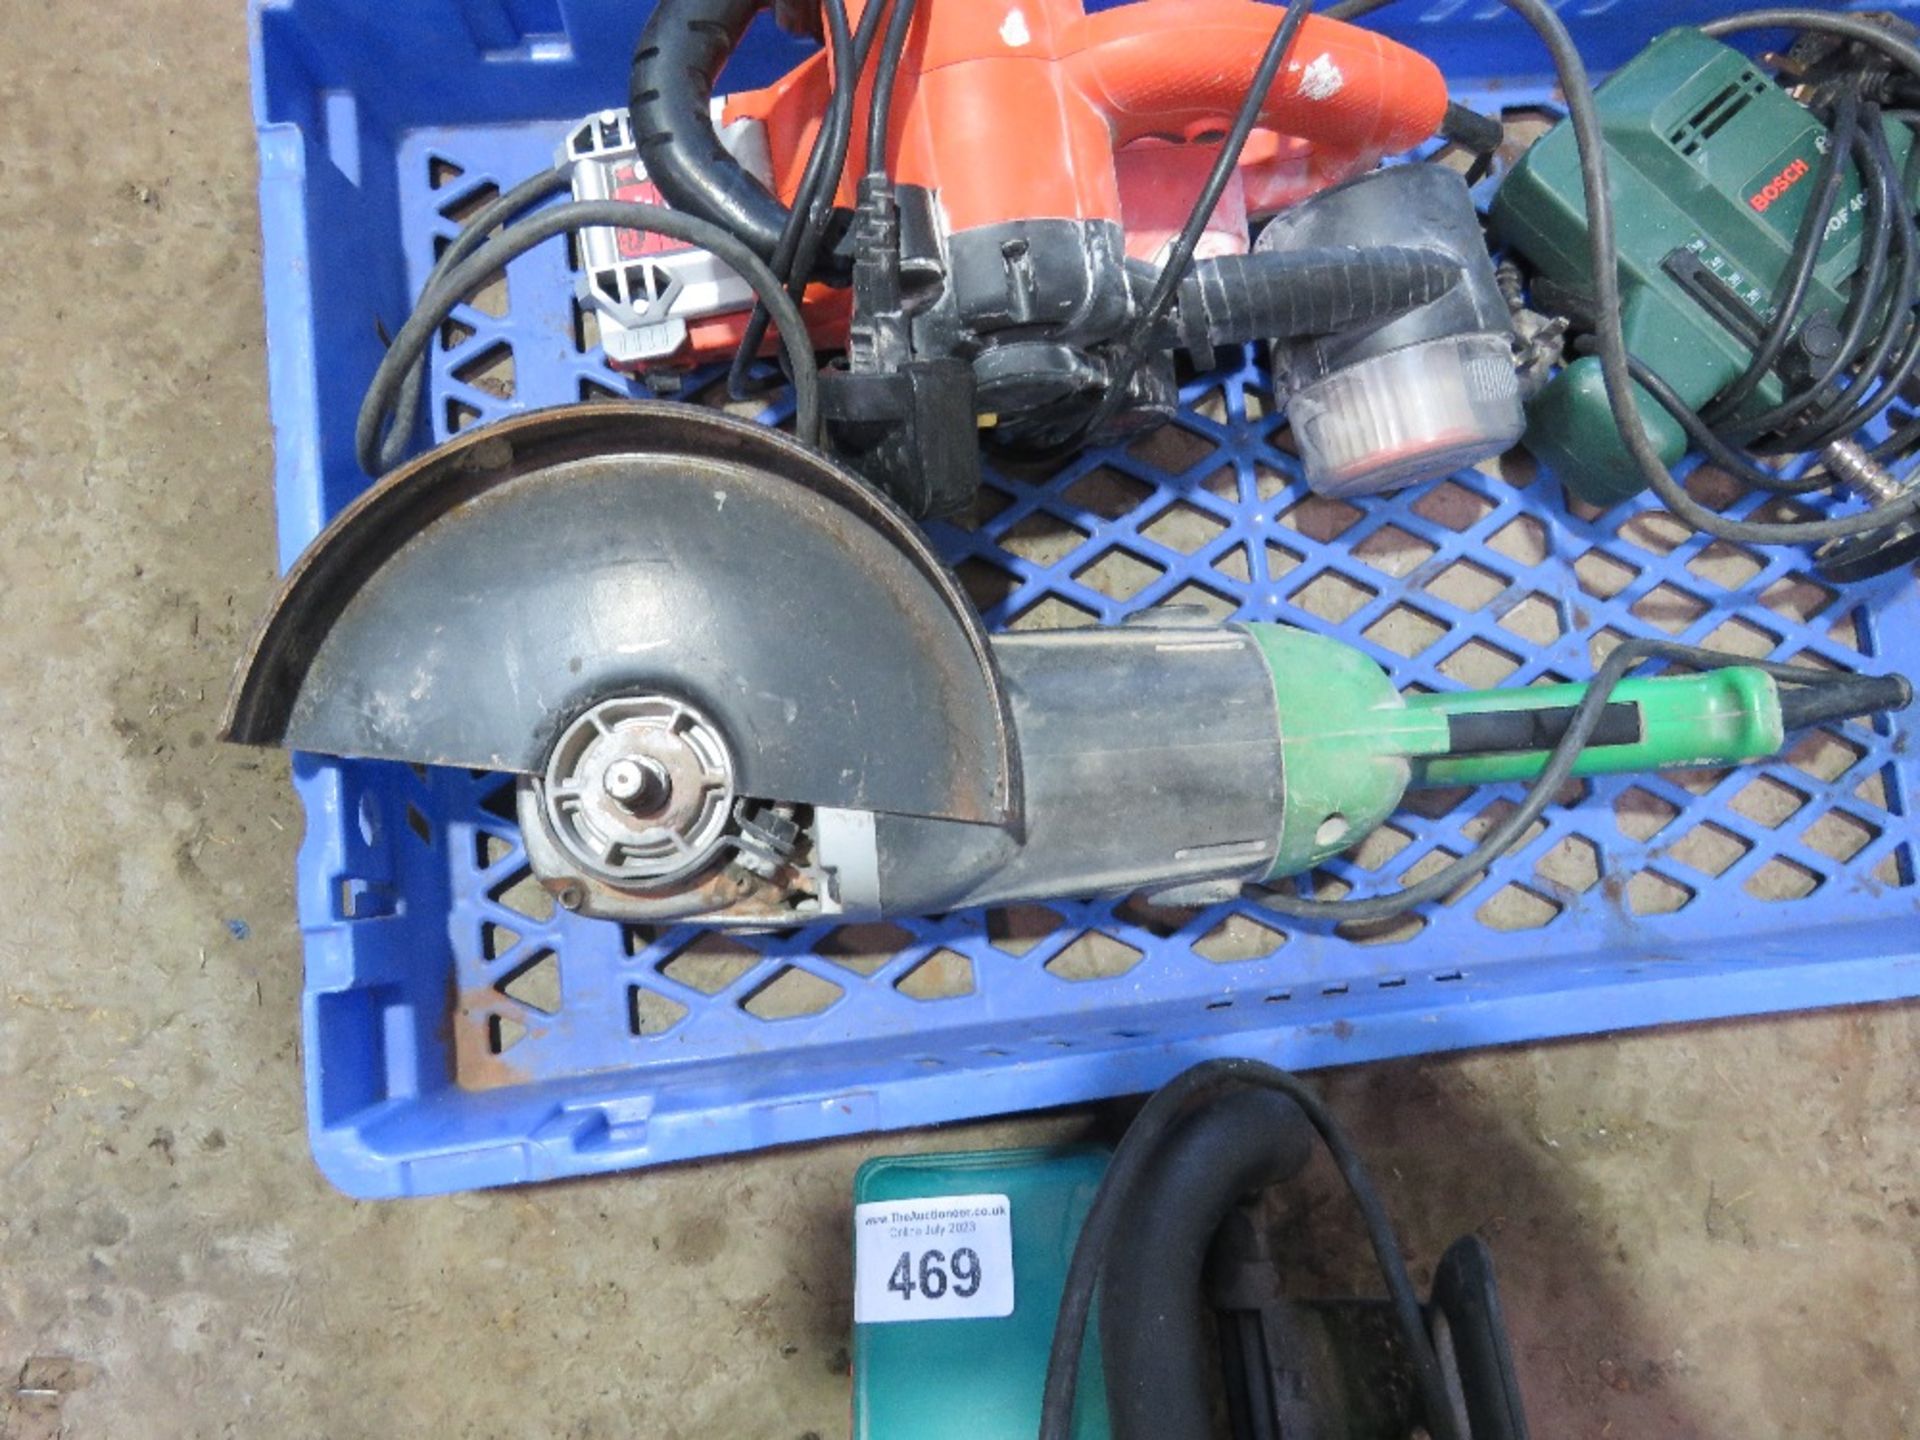 4 X ASSORTED 240VOLT POWER TOOLS: SANDER, GRINDER, ROUTER, CHAINSAW. THIS LOT IS SOLD UNDER THE A - Image 3 of 5